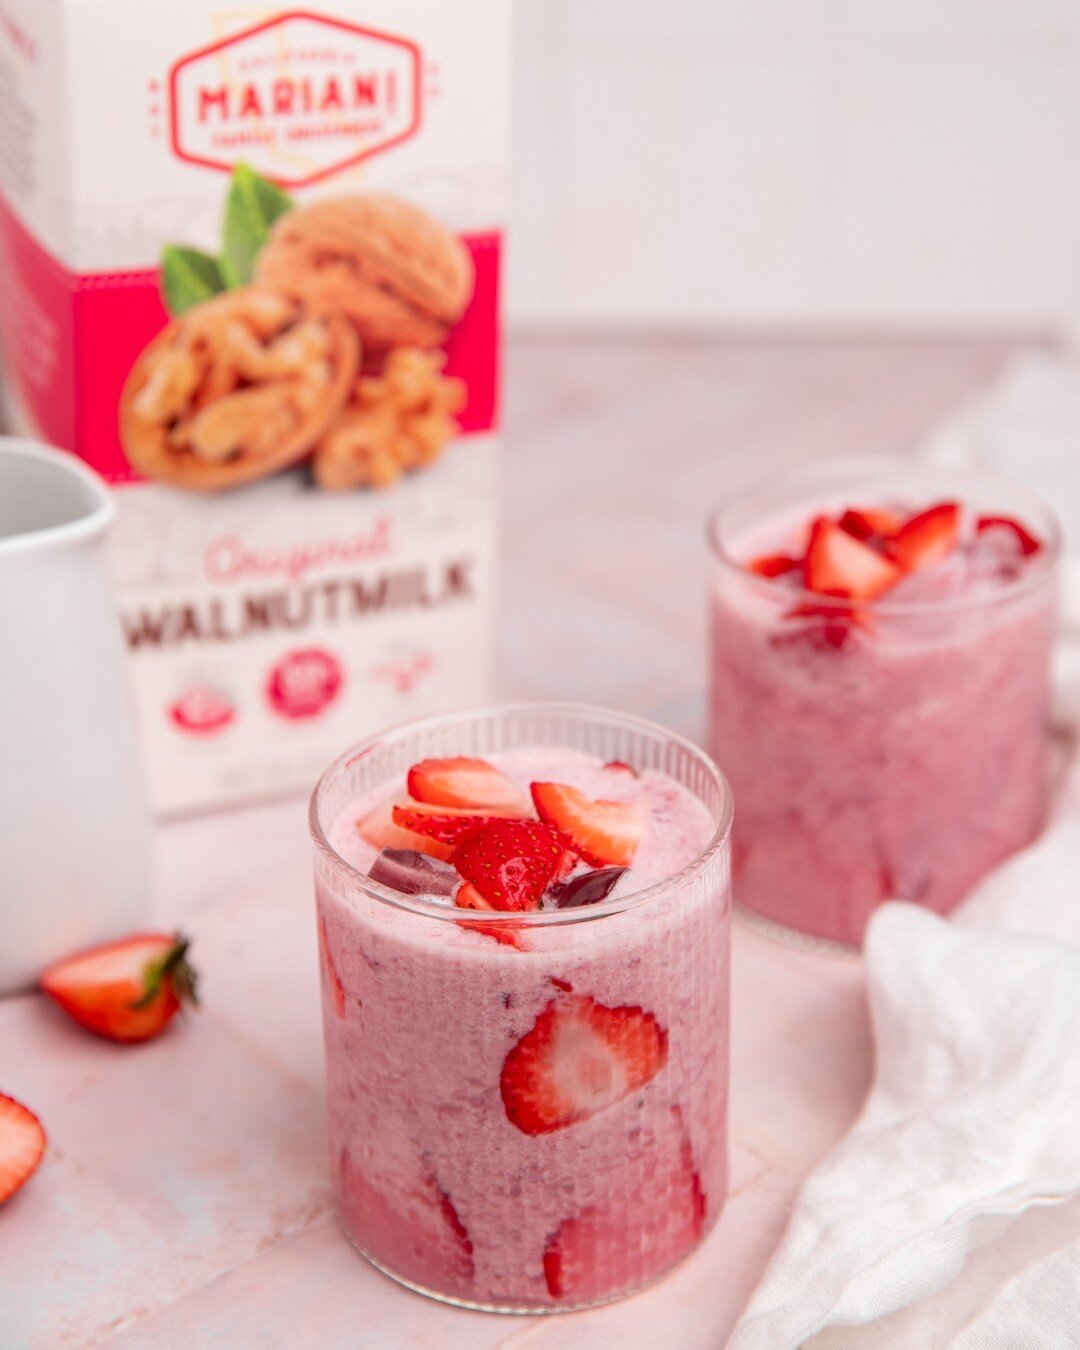 We used our Original Walnutmilk to create our version of a fruity and refreshing &quot;pink drink&quot;. Delicious!